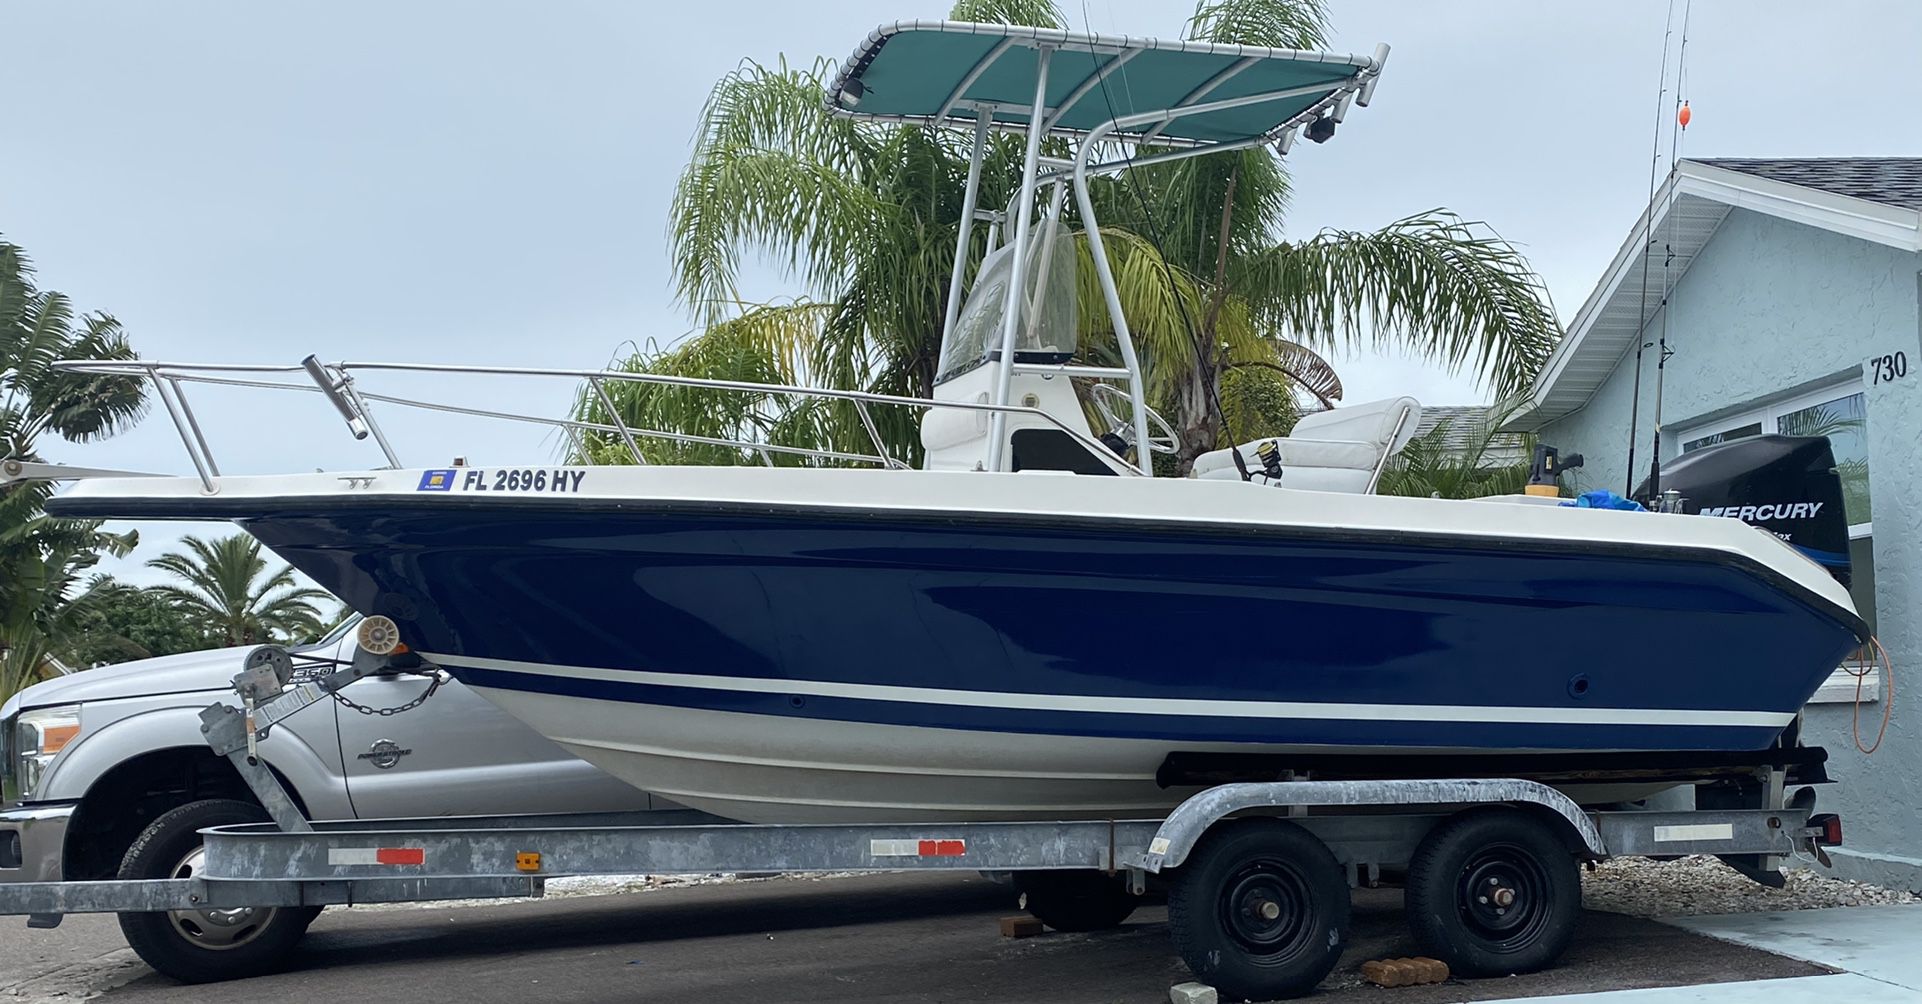 Sea ray 20ft with fuel injector 200 Mercury Optimax, just serviced 40 days ago, everything works and runs good , you can bring a mechanic To Check